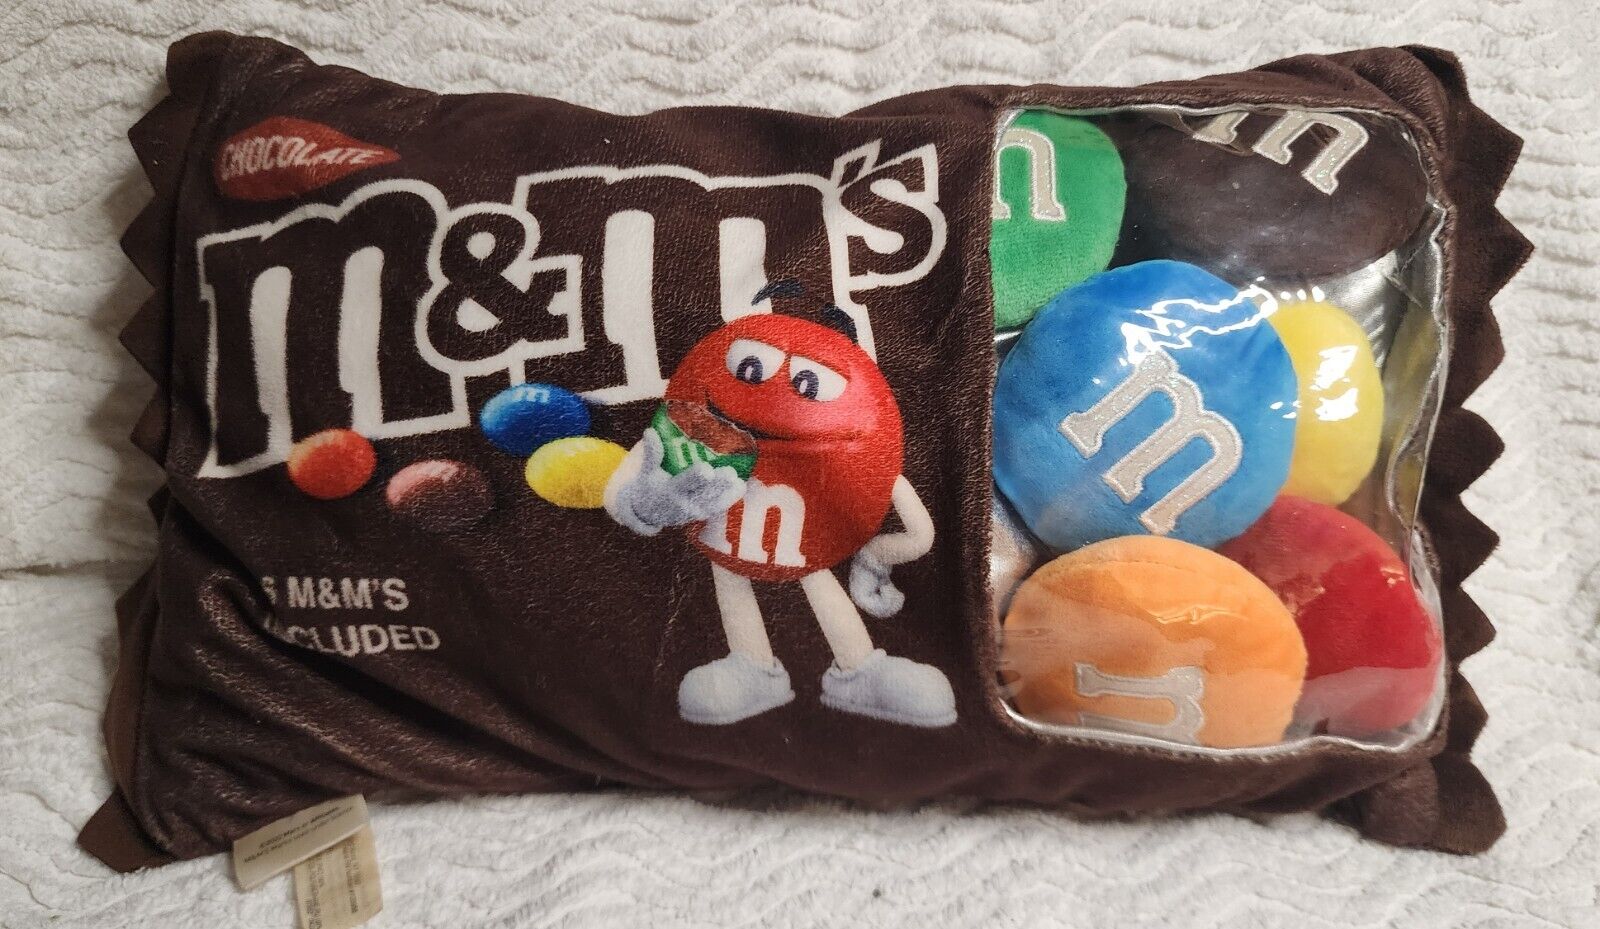 M&M\'s Stuffed PILLOW Toy Candy BAG Wrapper Small M&Ms Inside HTF Complete Vguc